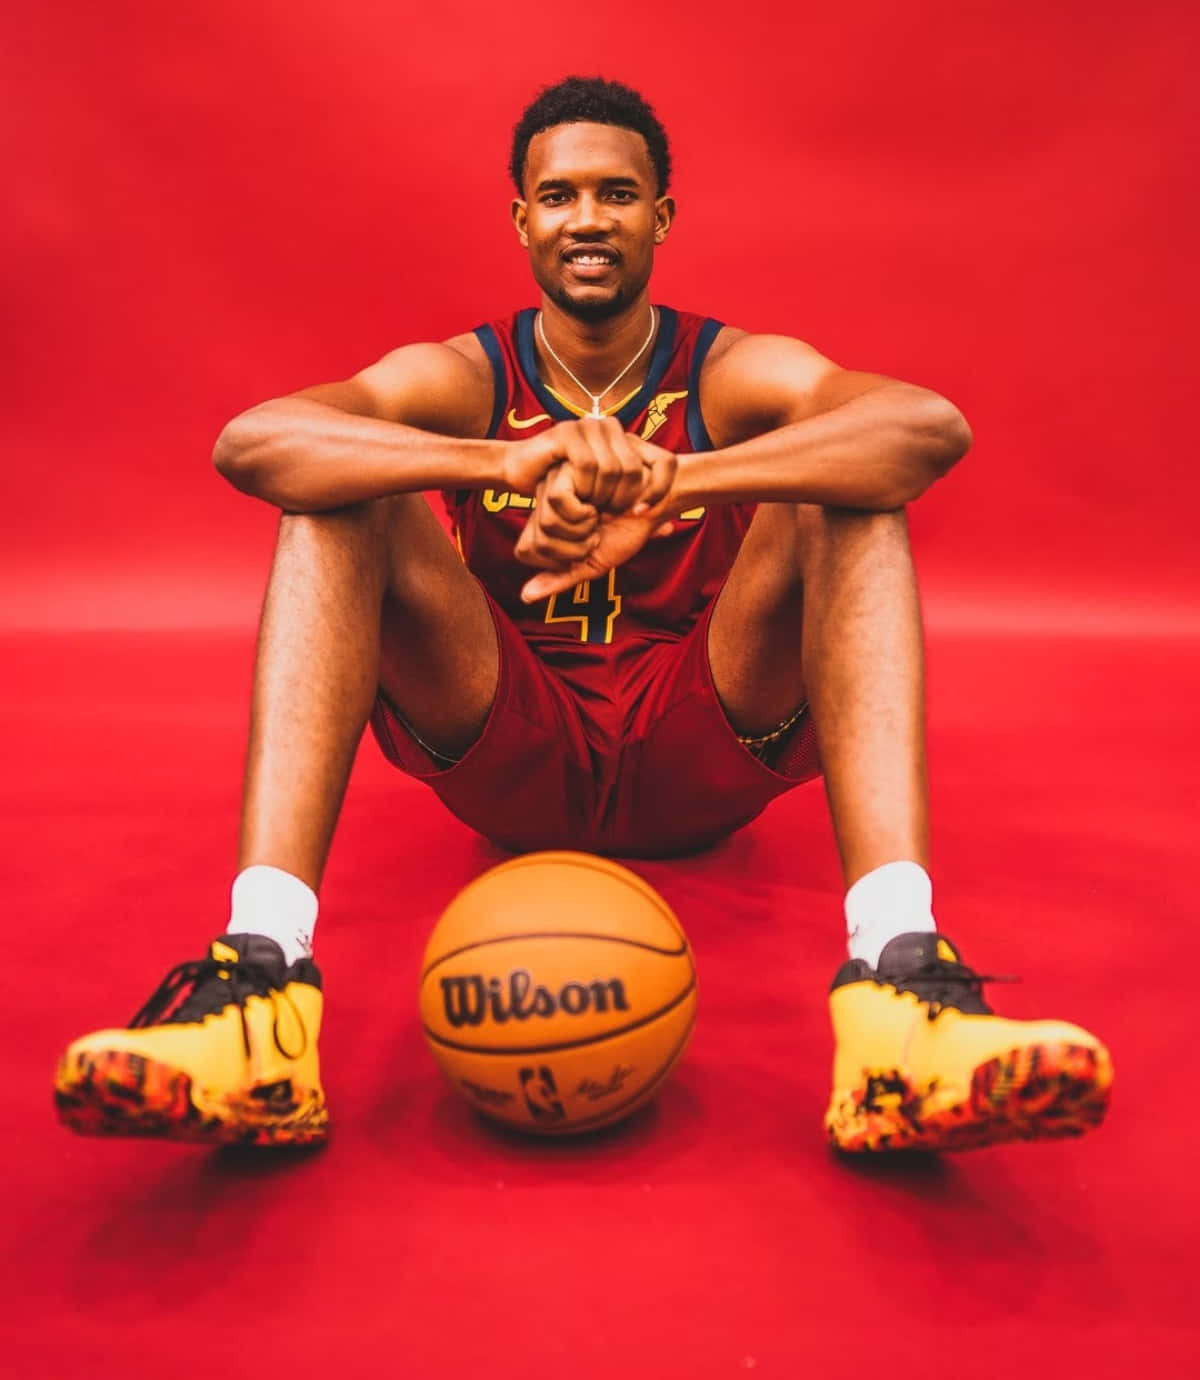 Basketball Player Red Backdrop Wallpaper